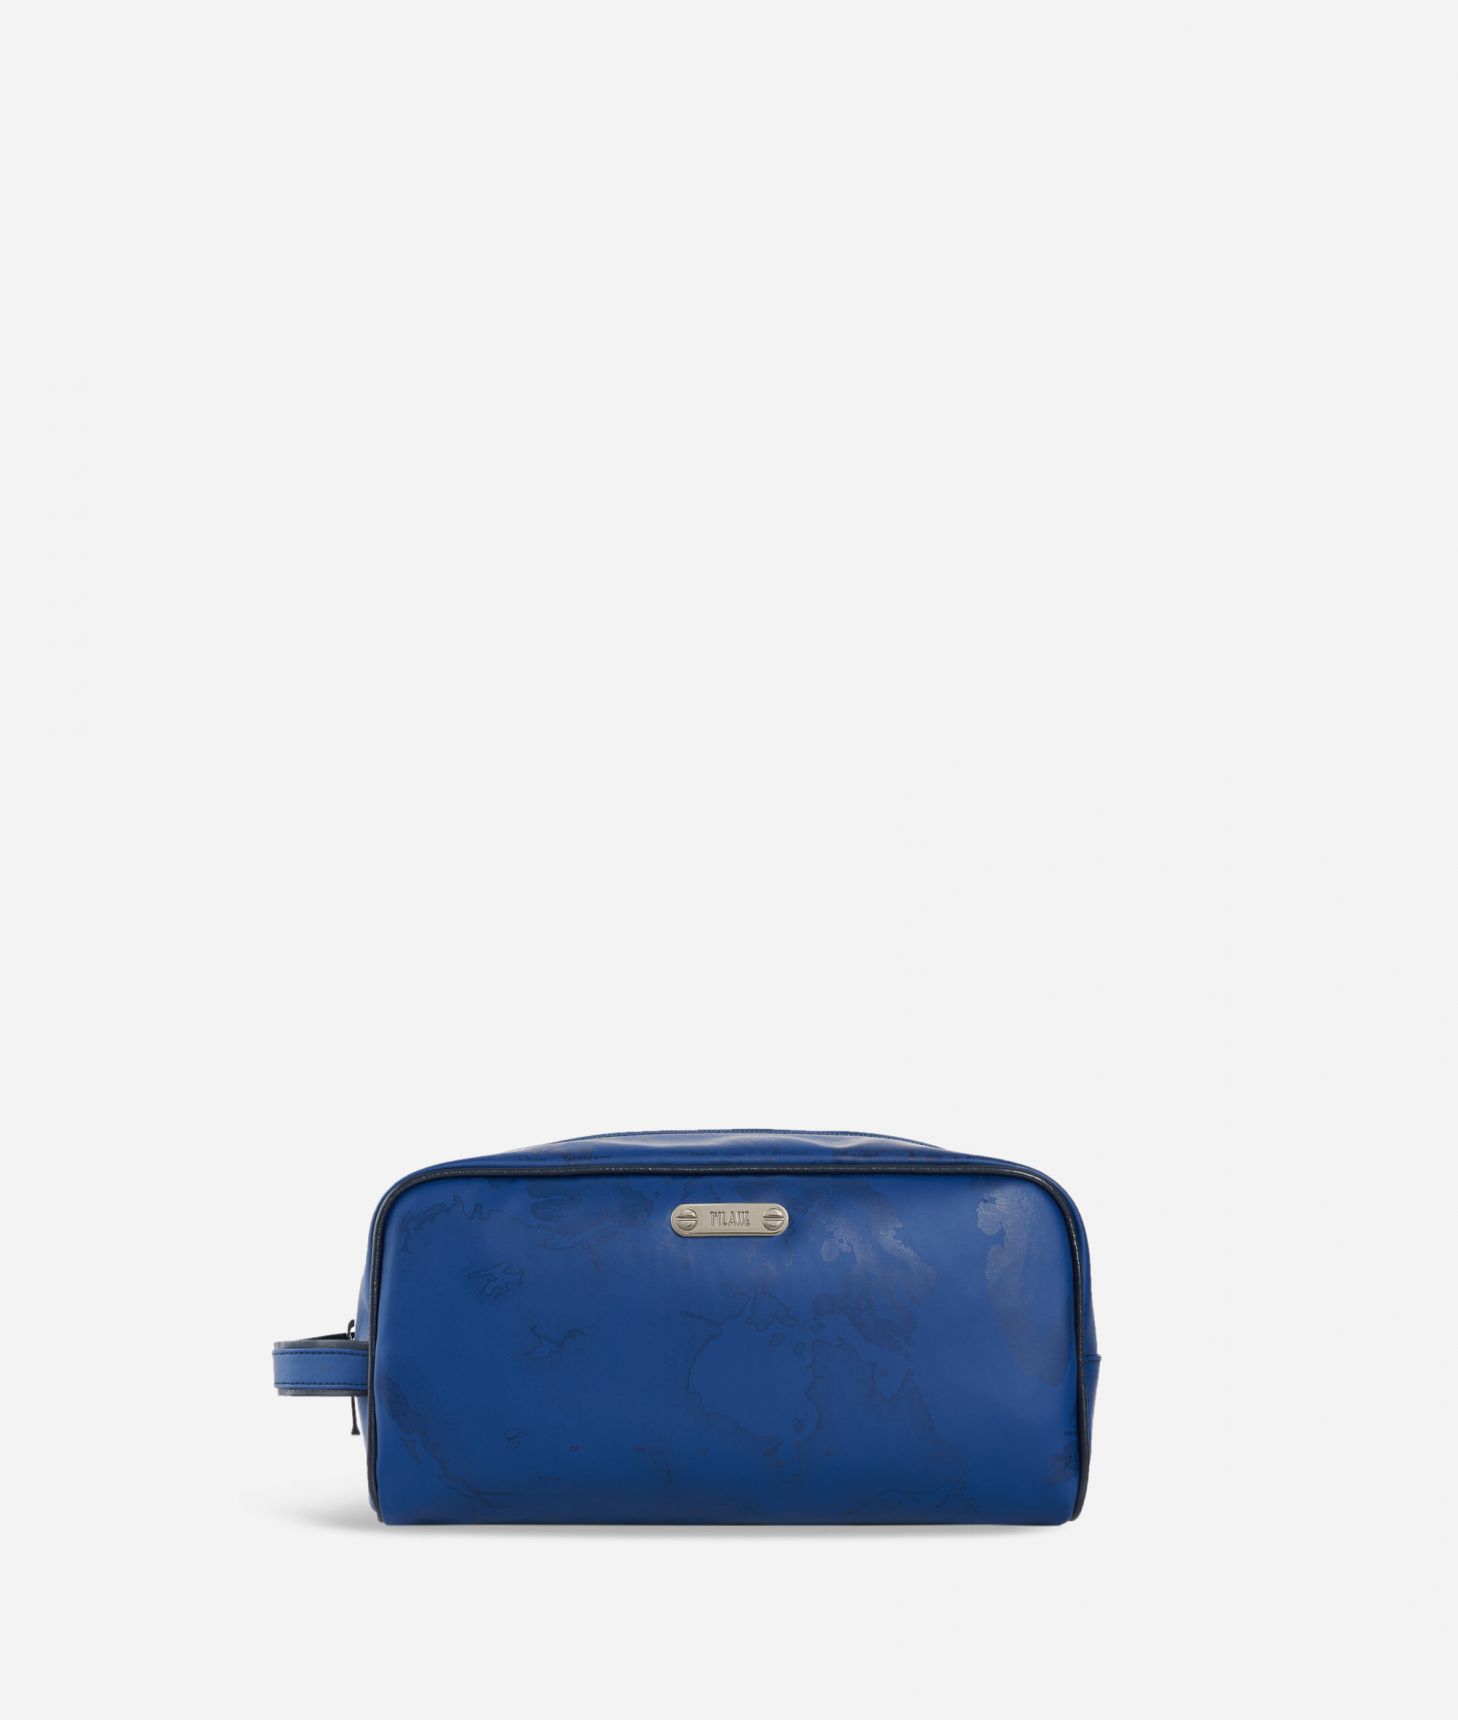 Rectangular beauty case in blue Geo fabric,front